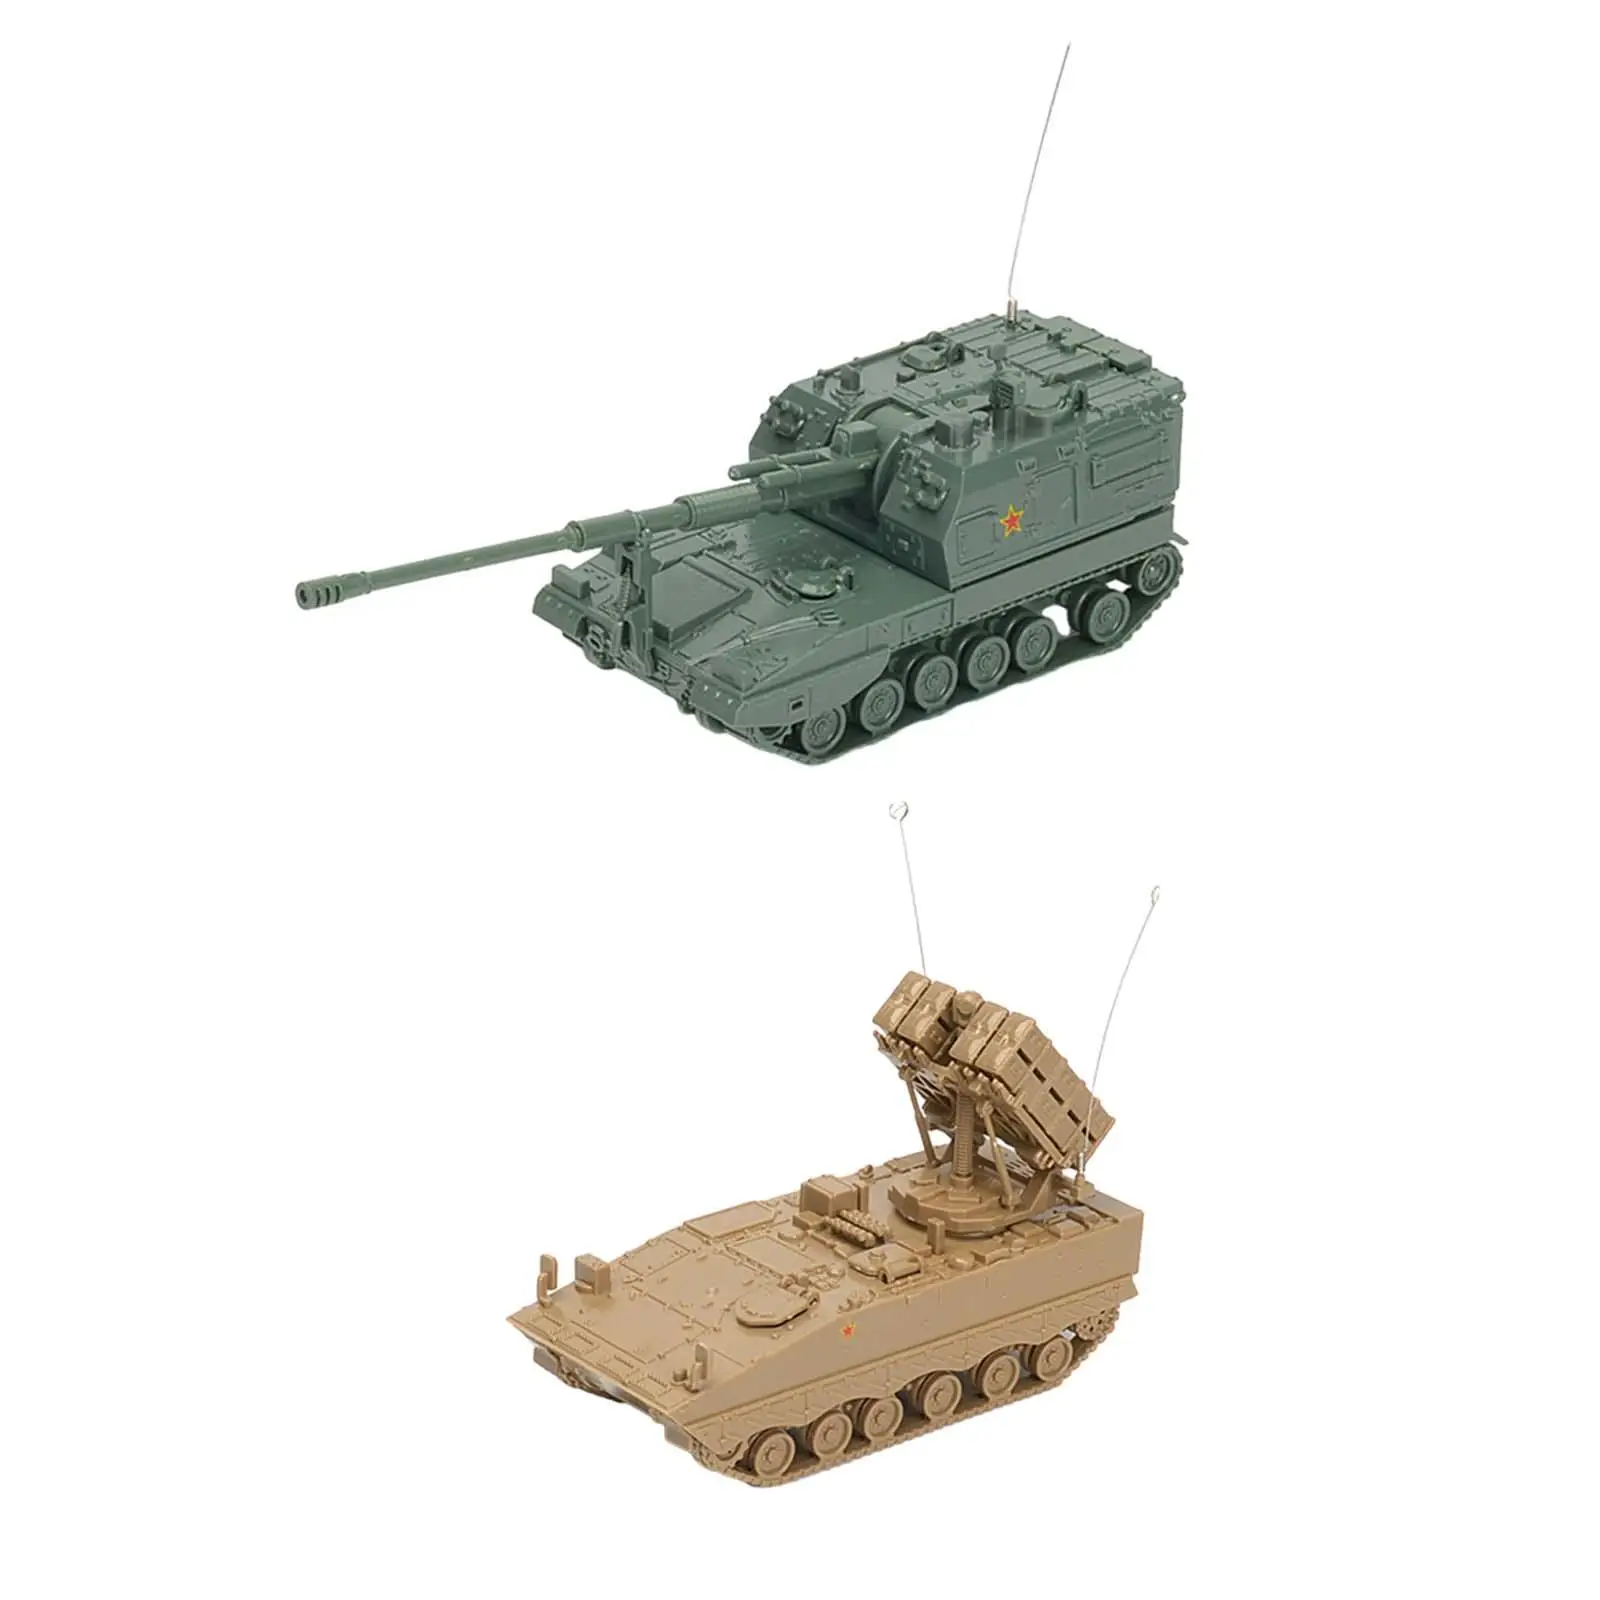 1:72 Scale Building Model Kits Education Toy DIY Assemble Armored Tank Model for Kids Display Children Party Favors Collection